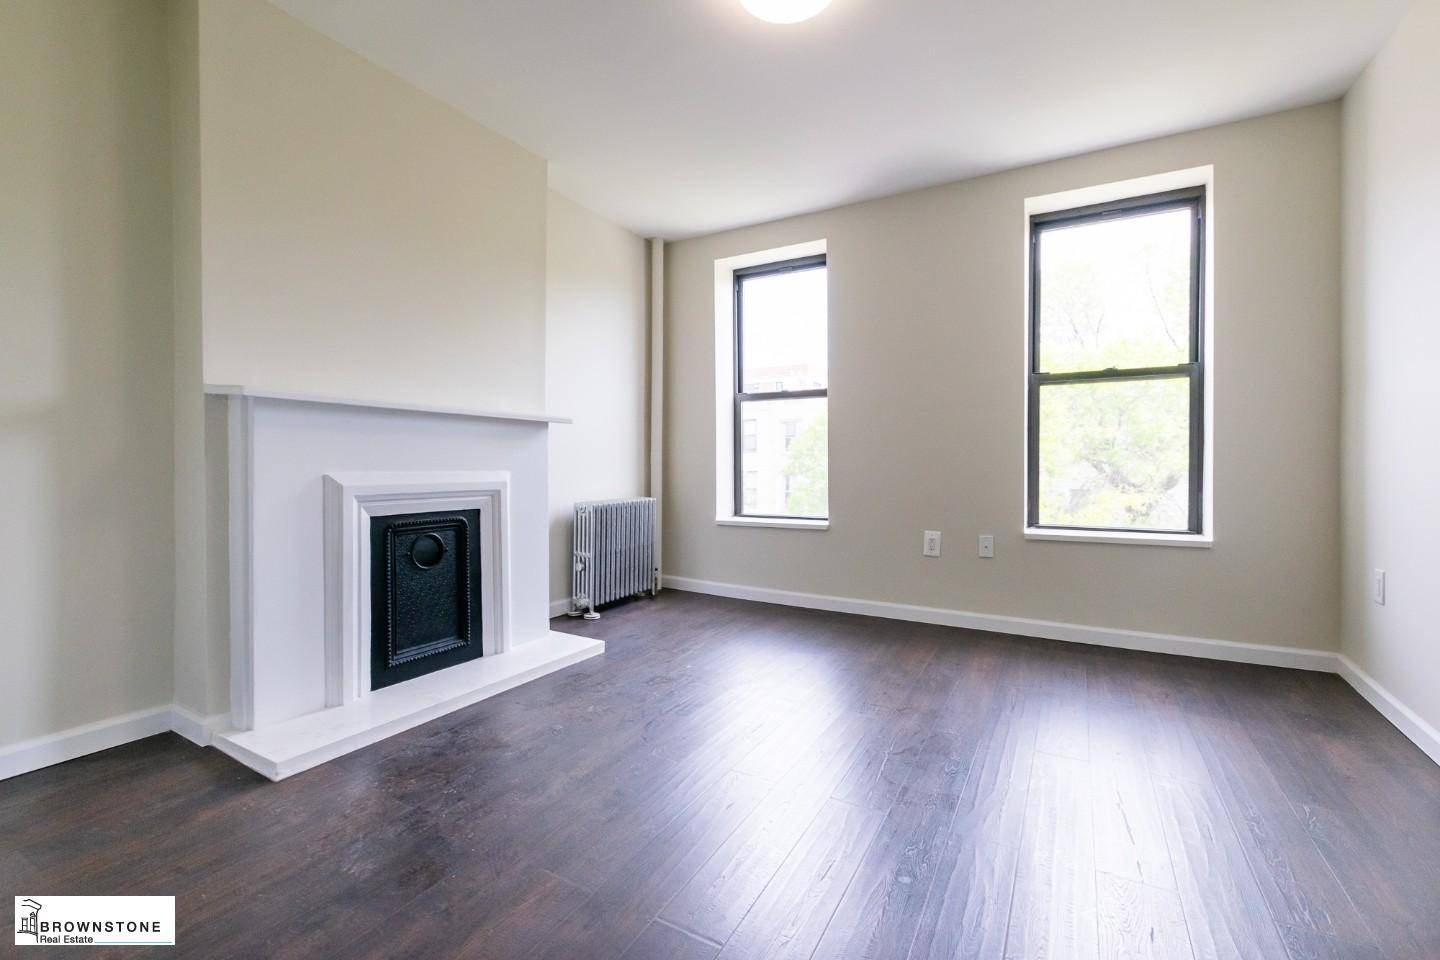 On 6th Avenue between 19th and 20th Streets in Park Slope South, 662 is a quiet, residential building that offers spacious apartments with high quality renovations.